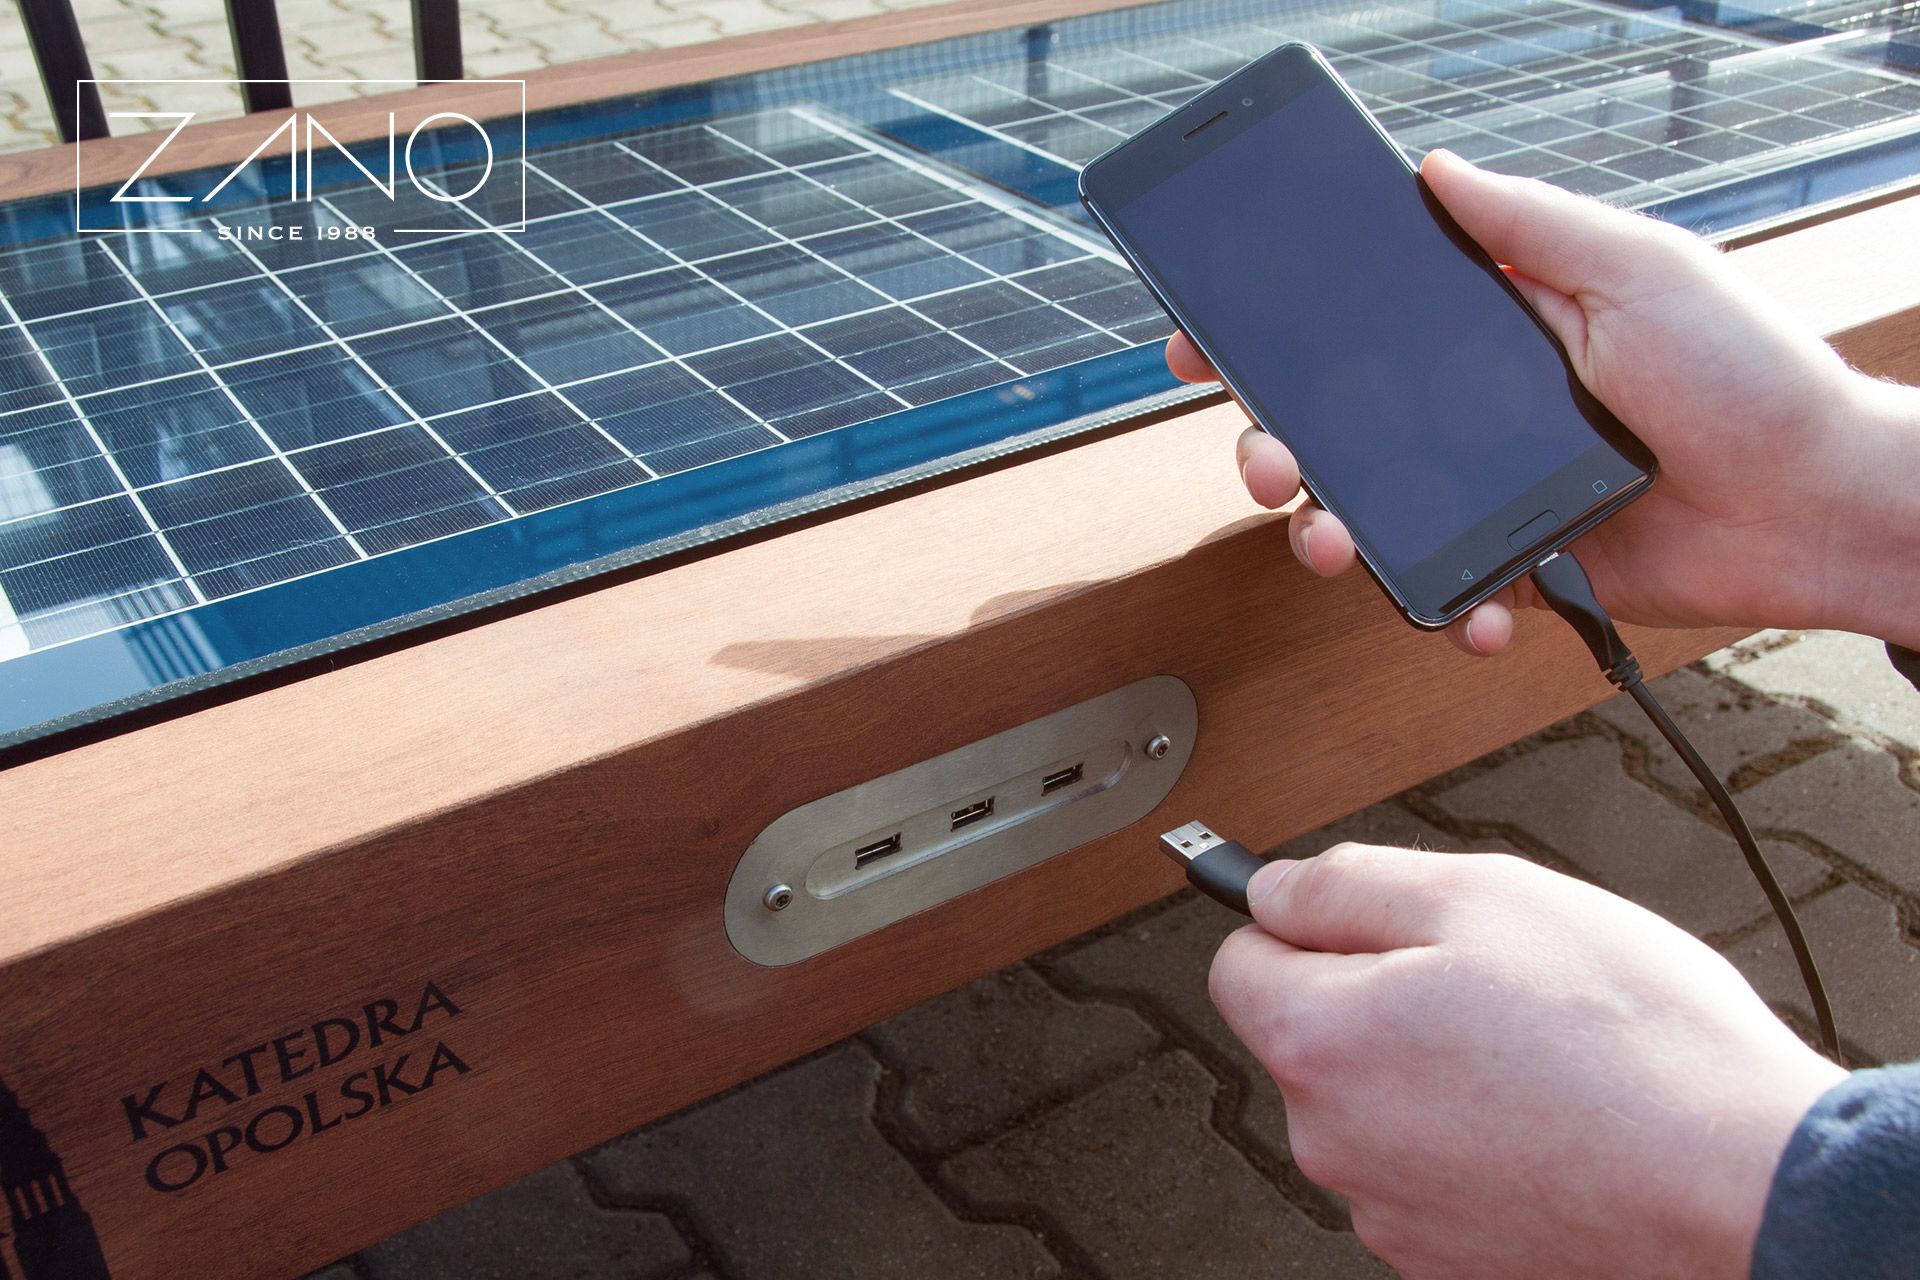 City bench with three charge ports for mobile phones